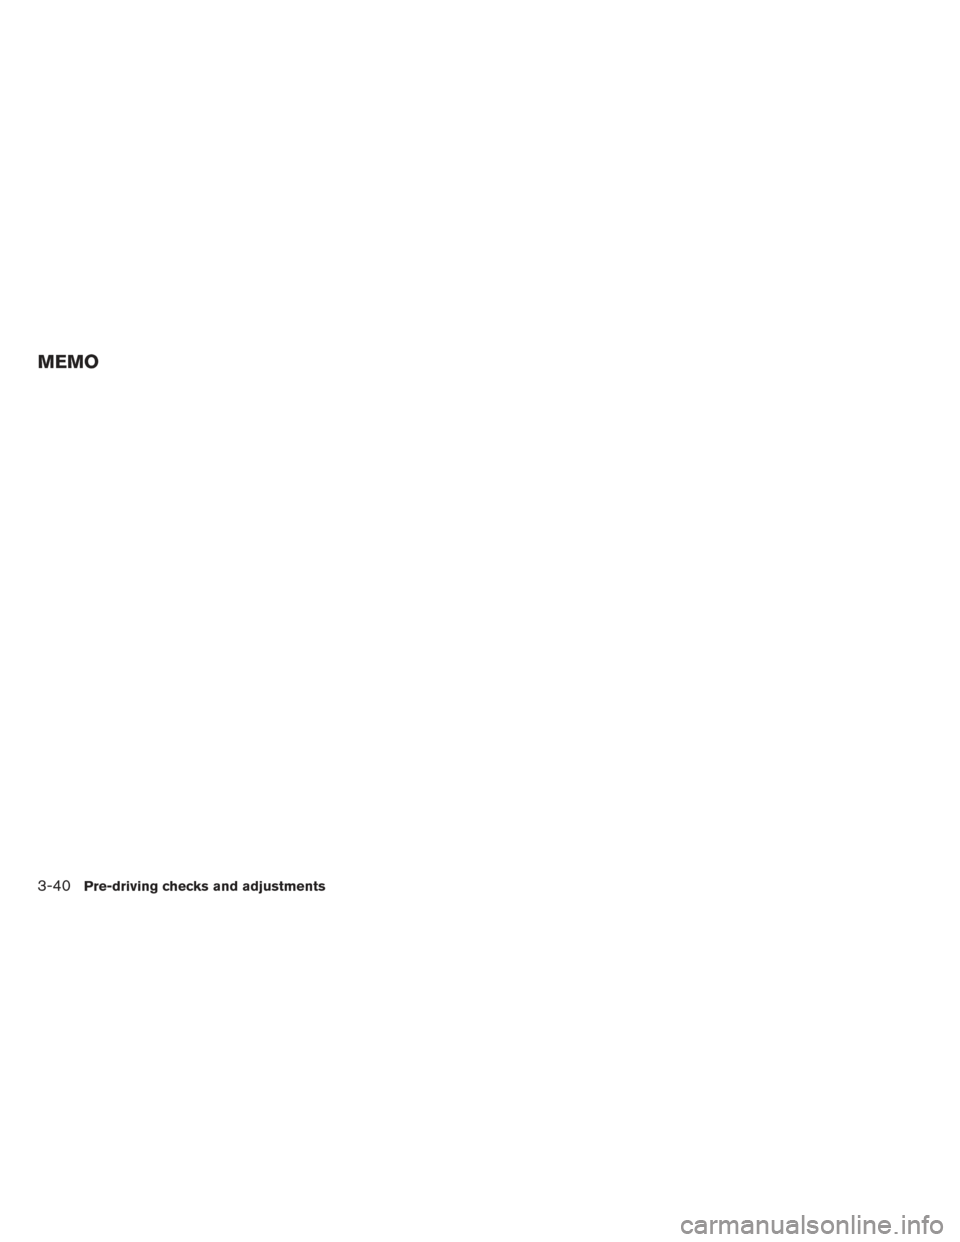 NISSAN PATHFINDER 2014 R52 / 4.G Owners Manual MEMO
3-40Pre-driving checks and adjustments 